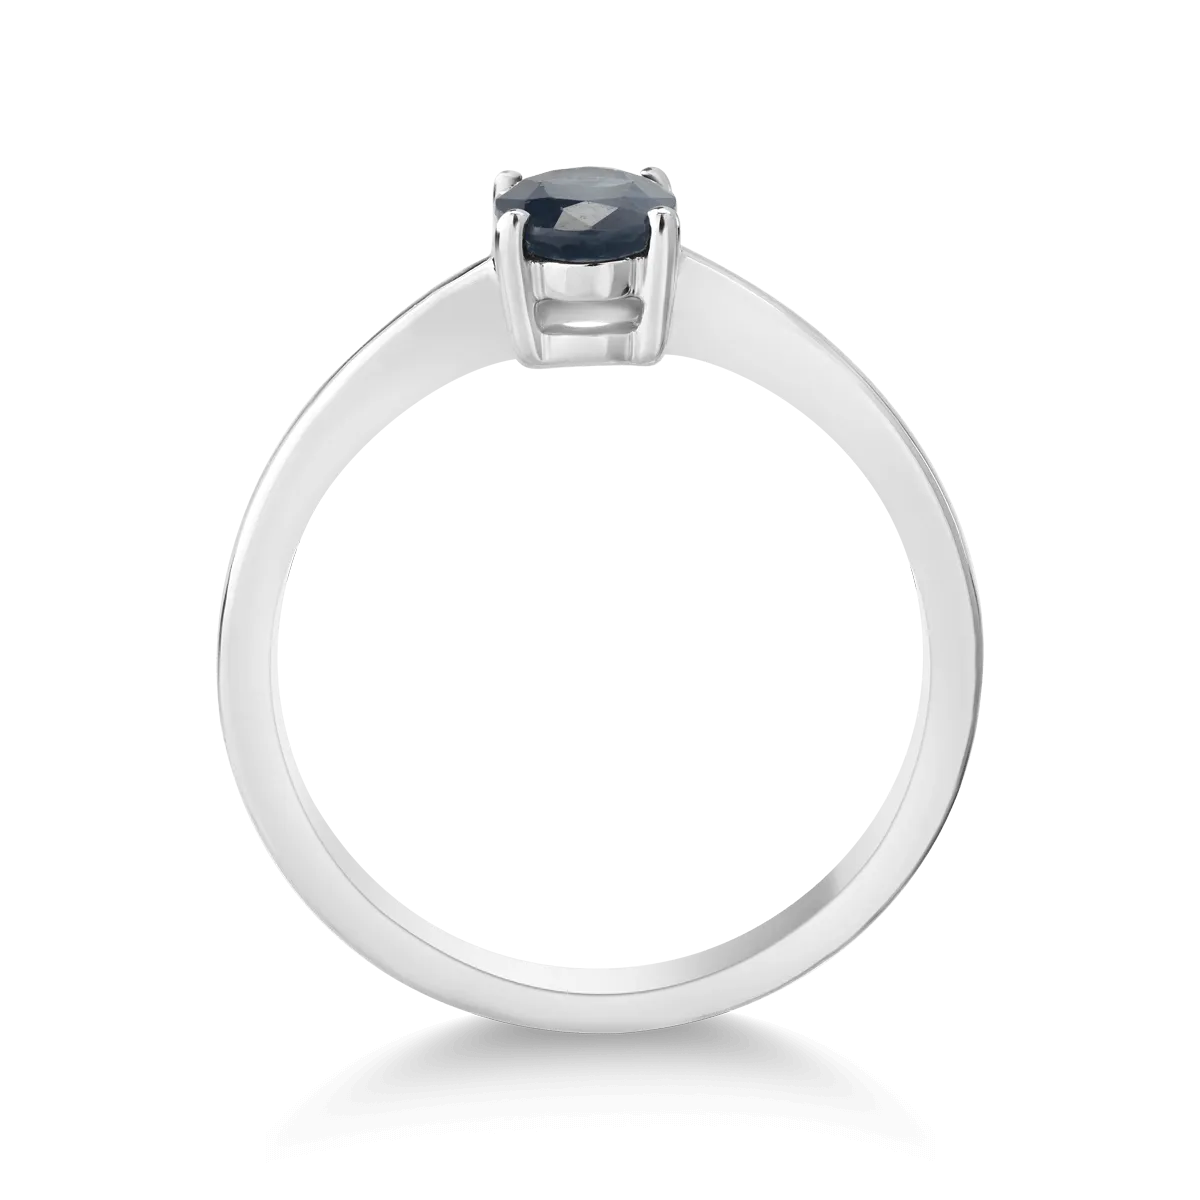 14K white gold ring with 0.87ct sapphire